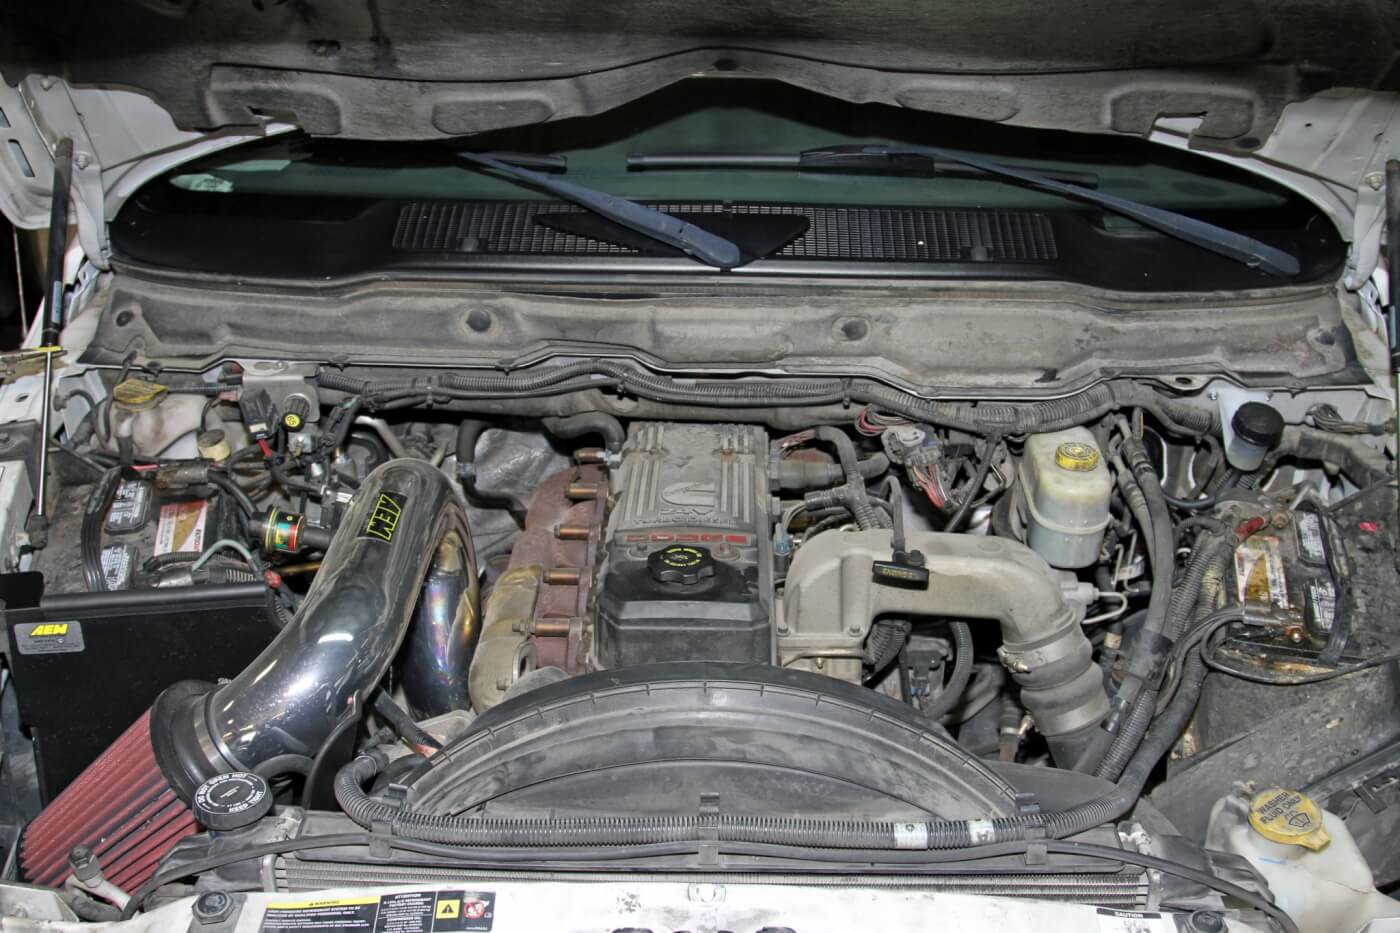 1. The AEM intake is the main thing you see when you open the hood; in this article, we'll be addressing issues that aren't as easy to see while we upgrade the fuel system.